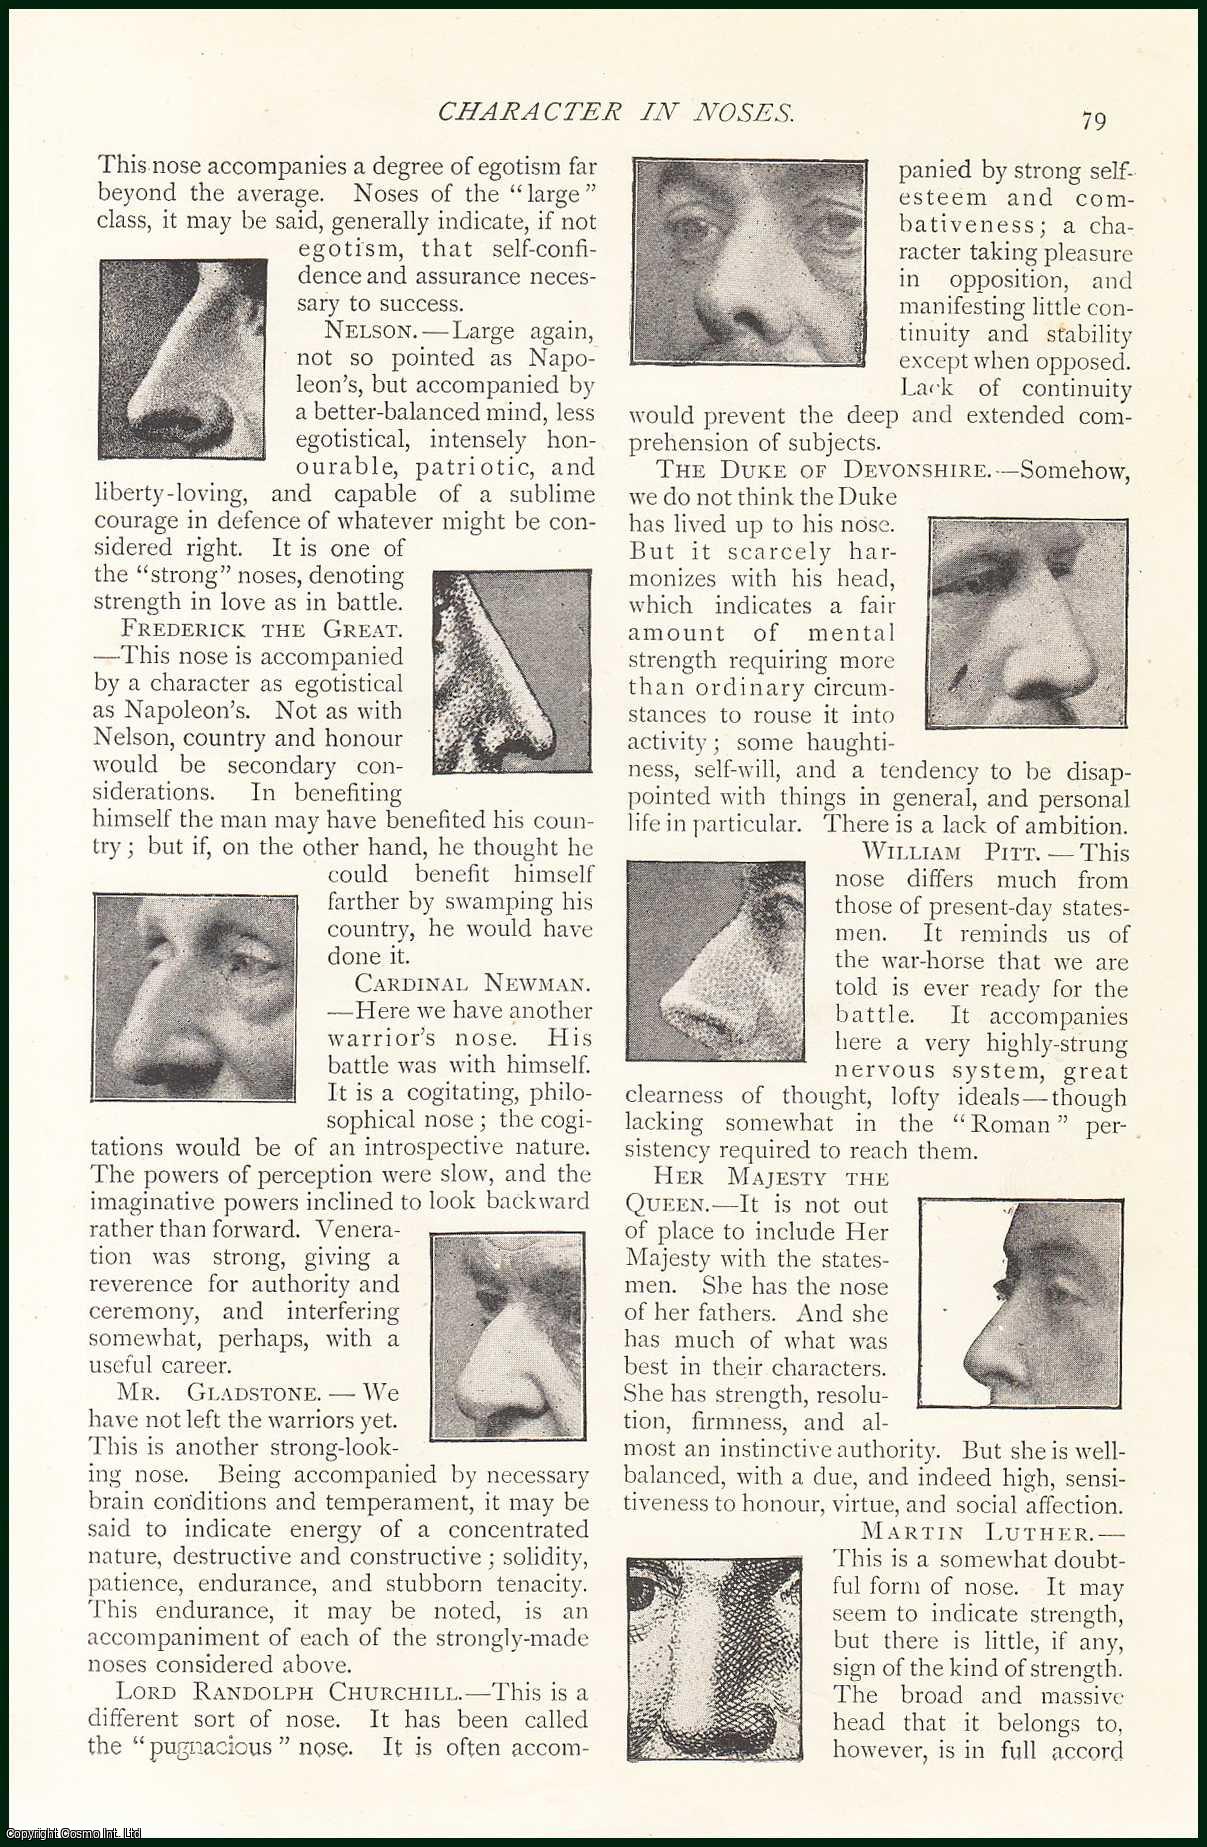 Stackpool E. O'Dell - Cardinal Newman ; Mr. Gladstone ; Nelson ; Martin Luther ; The Duke of Devonshire & others : Character in Noses. An uncommon original article from The Strand Magazine, 1896.